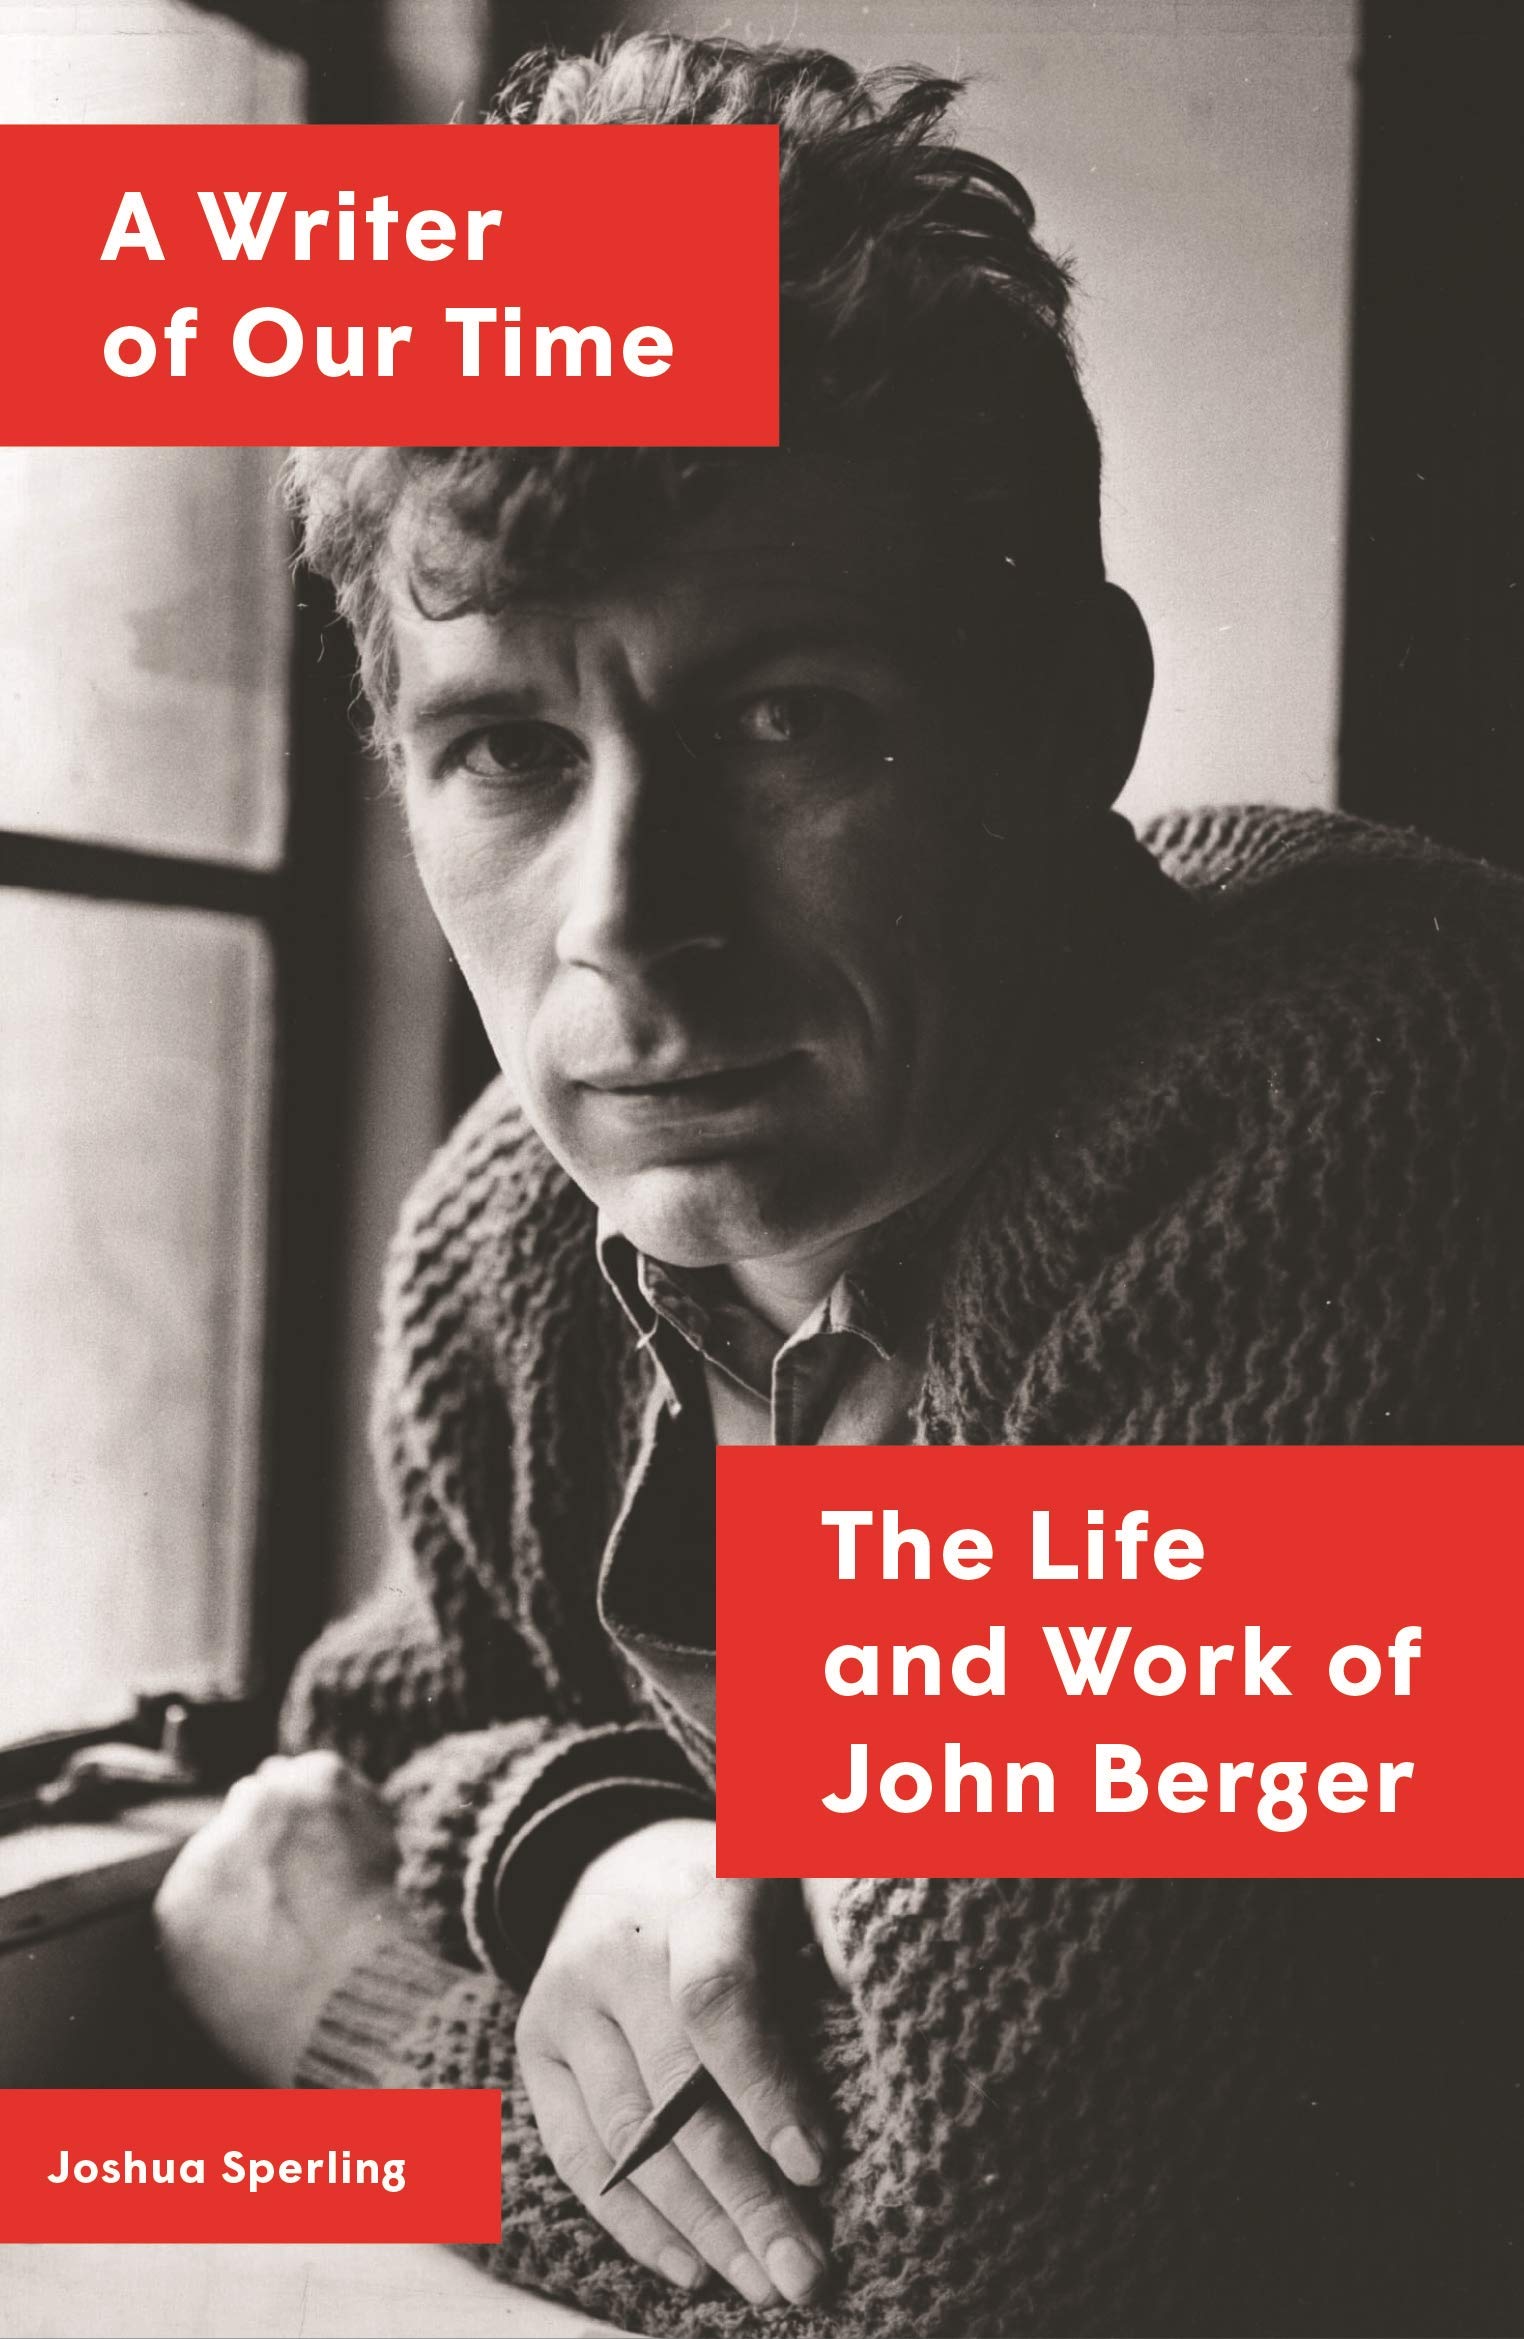 A Writer of Our Time: The Life and Work of John Berger | Joshua Sperling